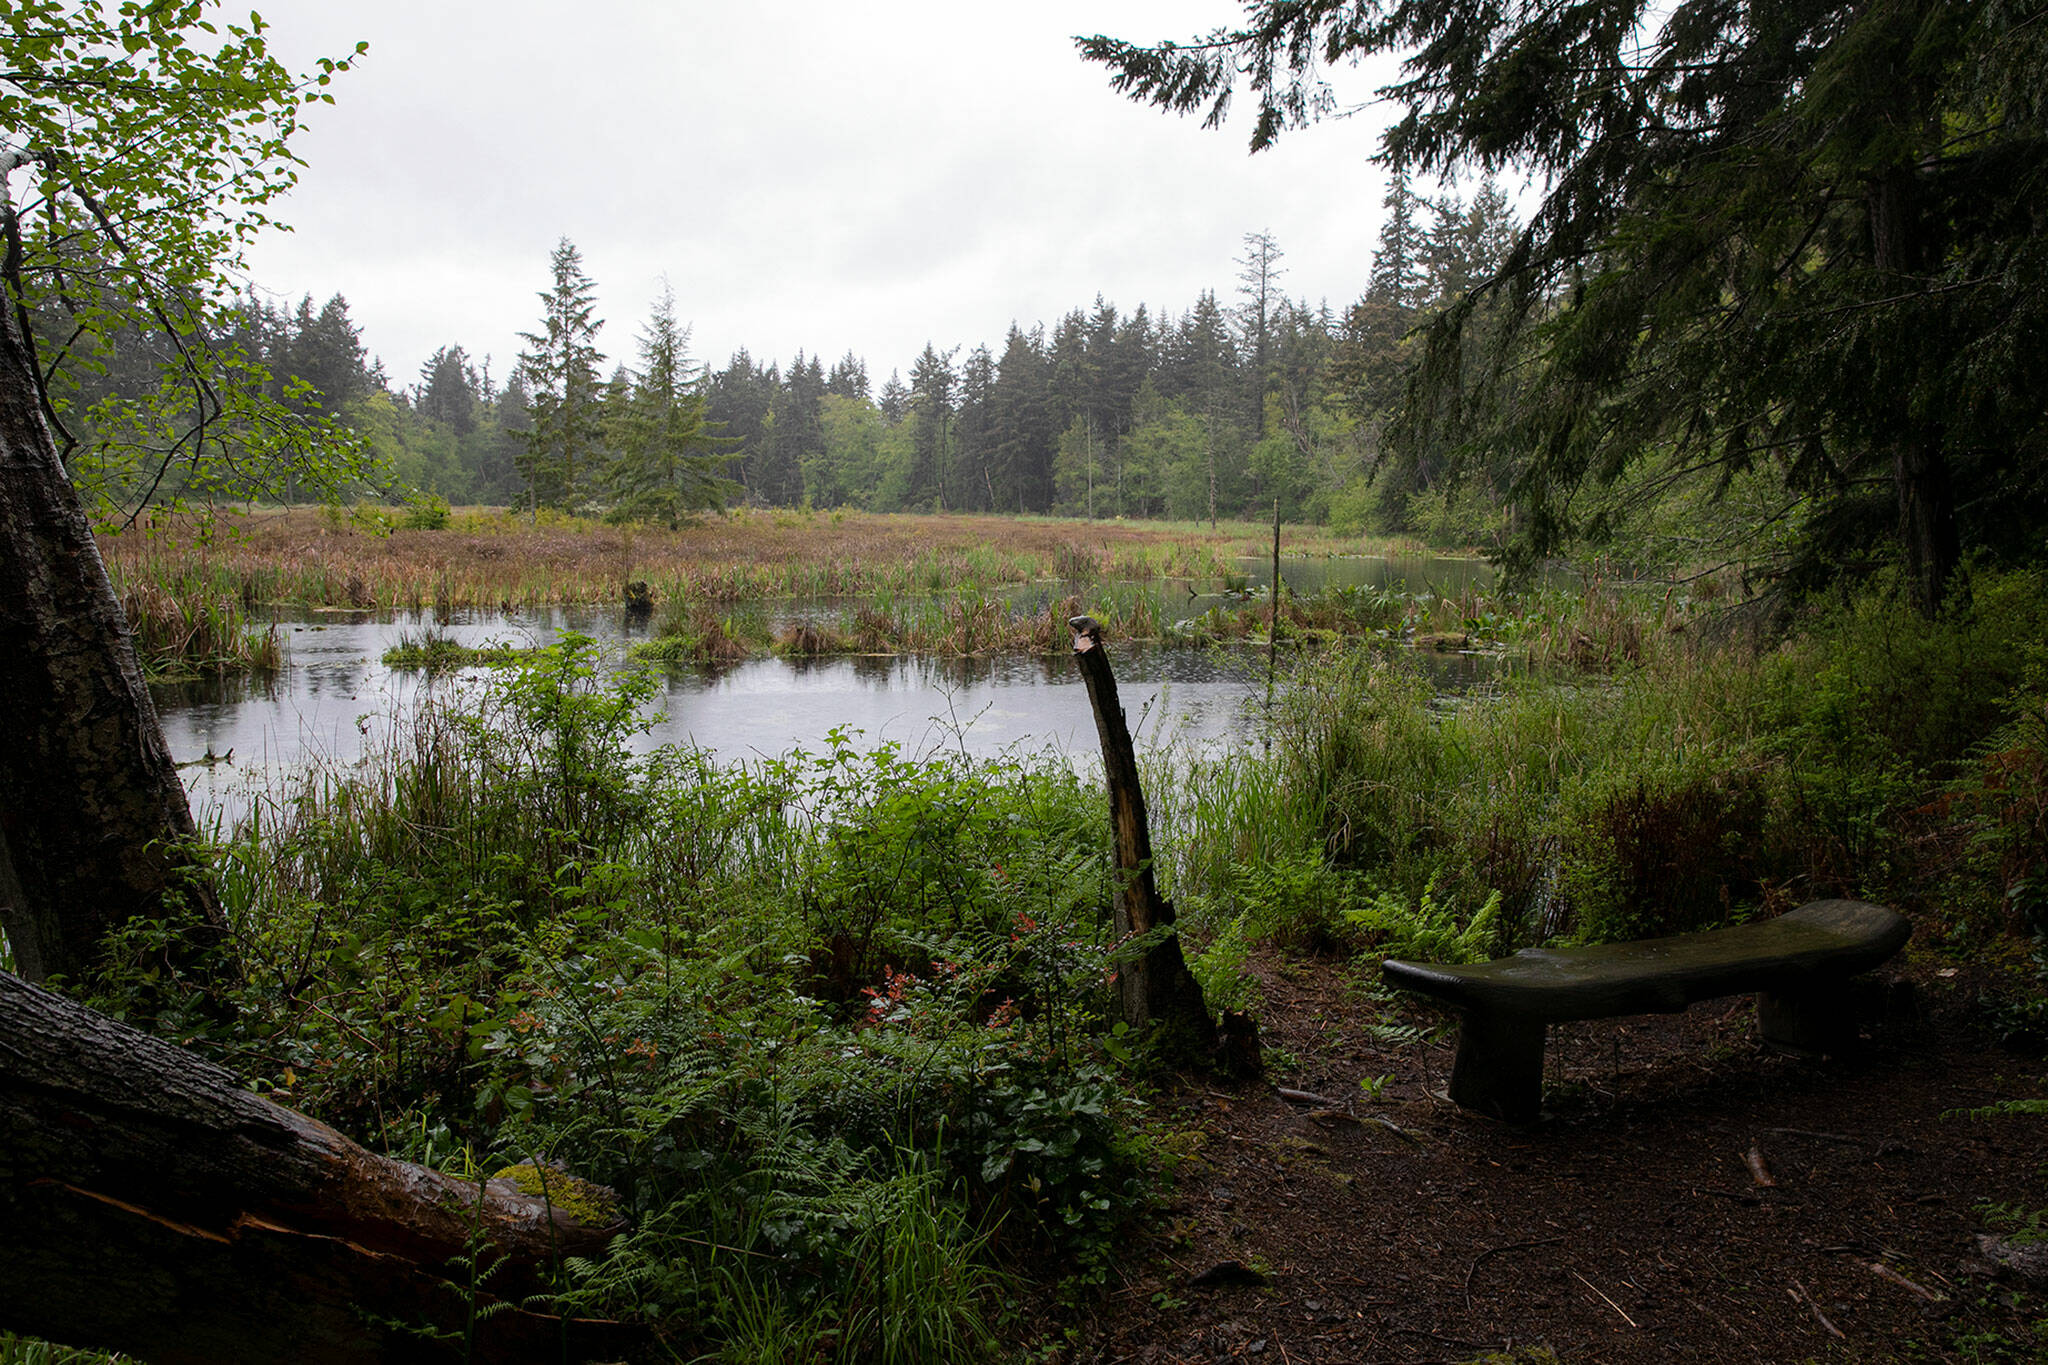 A bench overlooks Fen Pond at Earth Sanctuary on Whidbey Island. (Ryan Berry / The Herald)